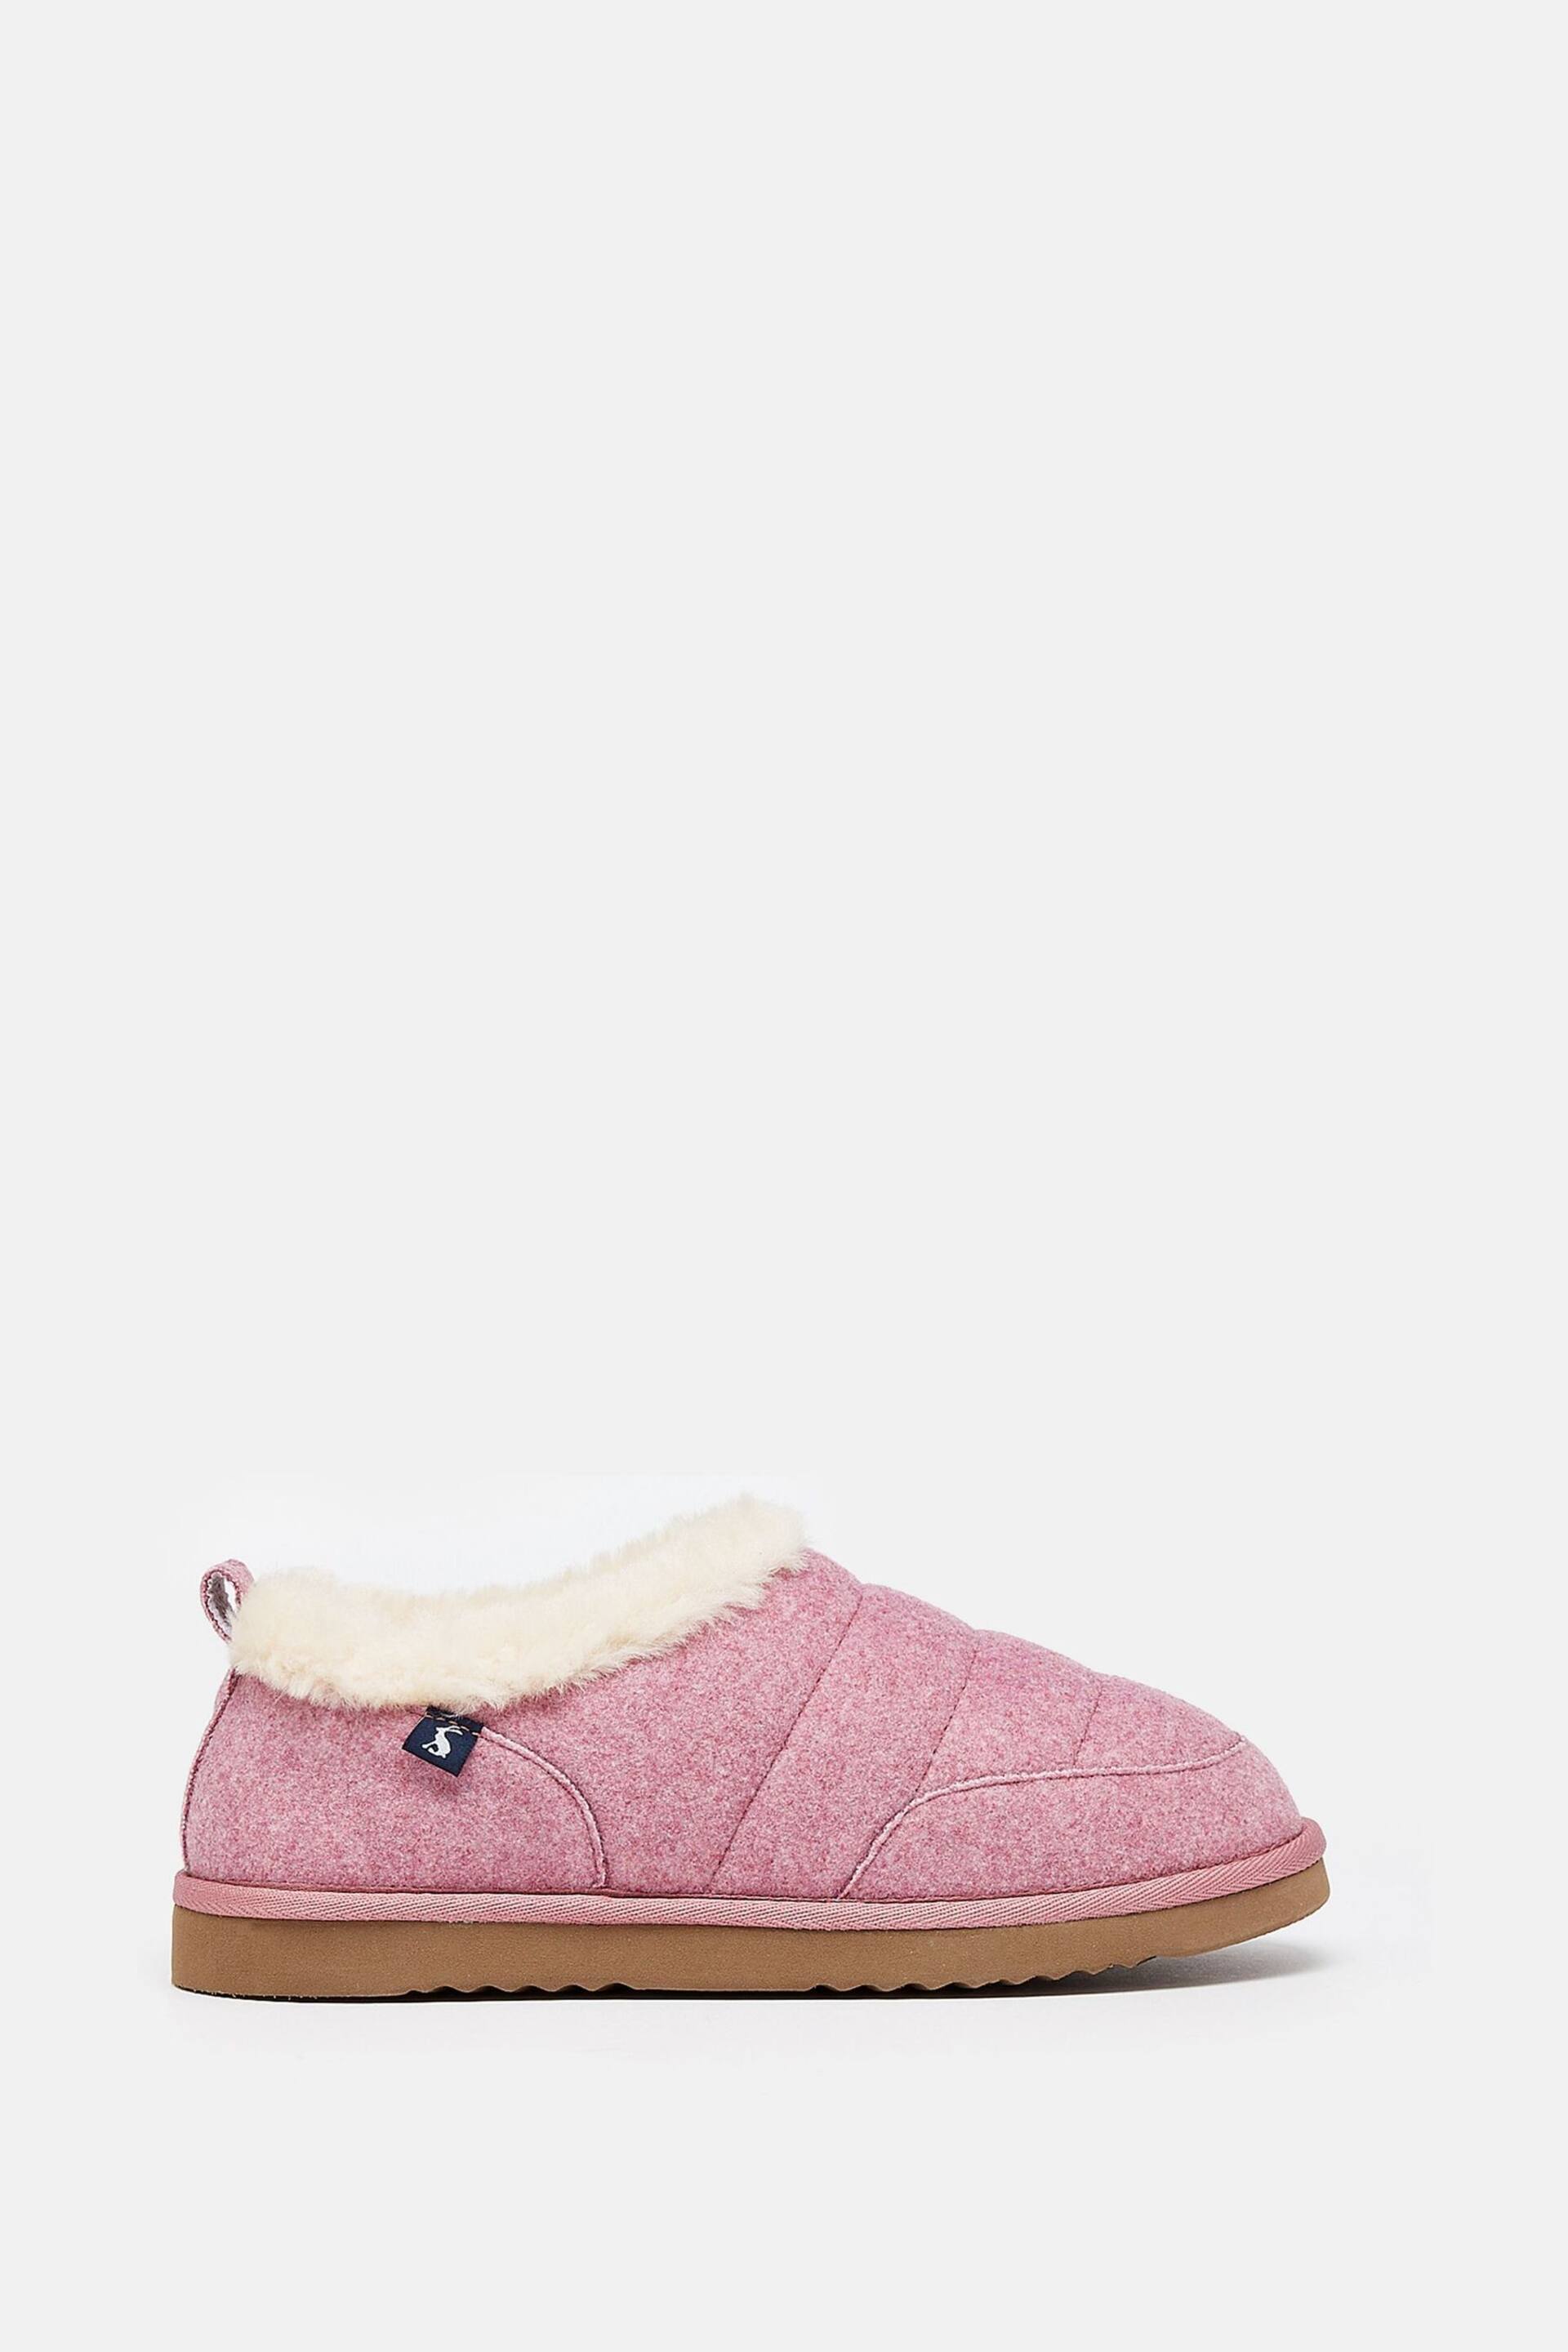 Joules Women's Lazydays Pink Faux Fur Lined Slippers - Image 1 of 5